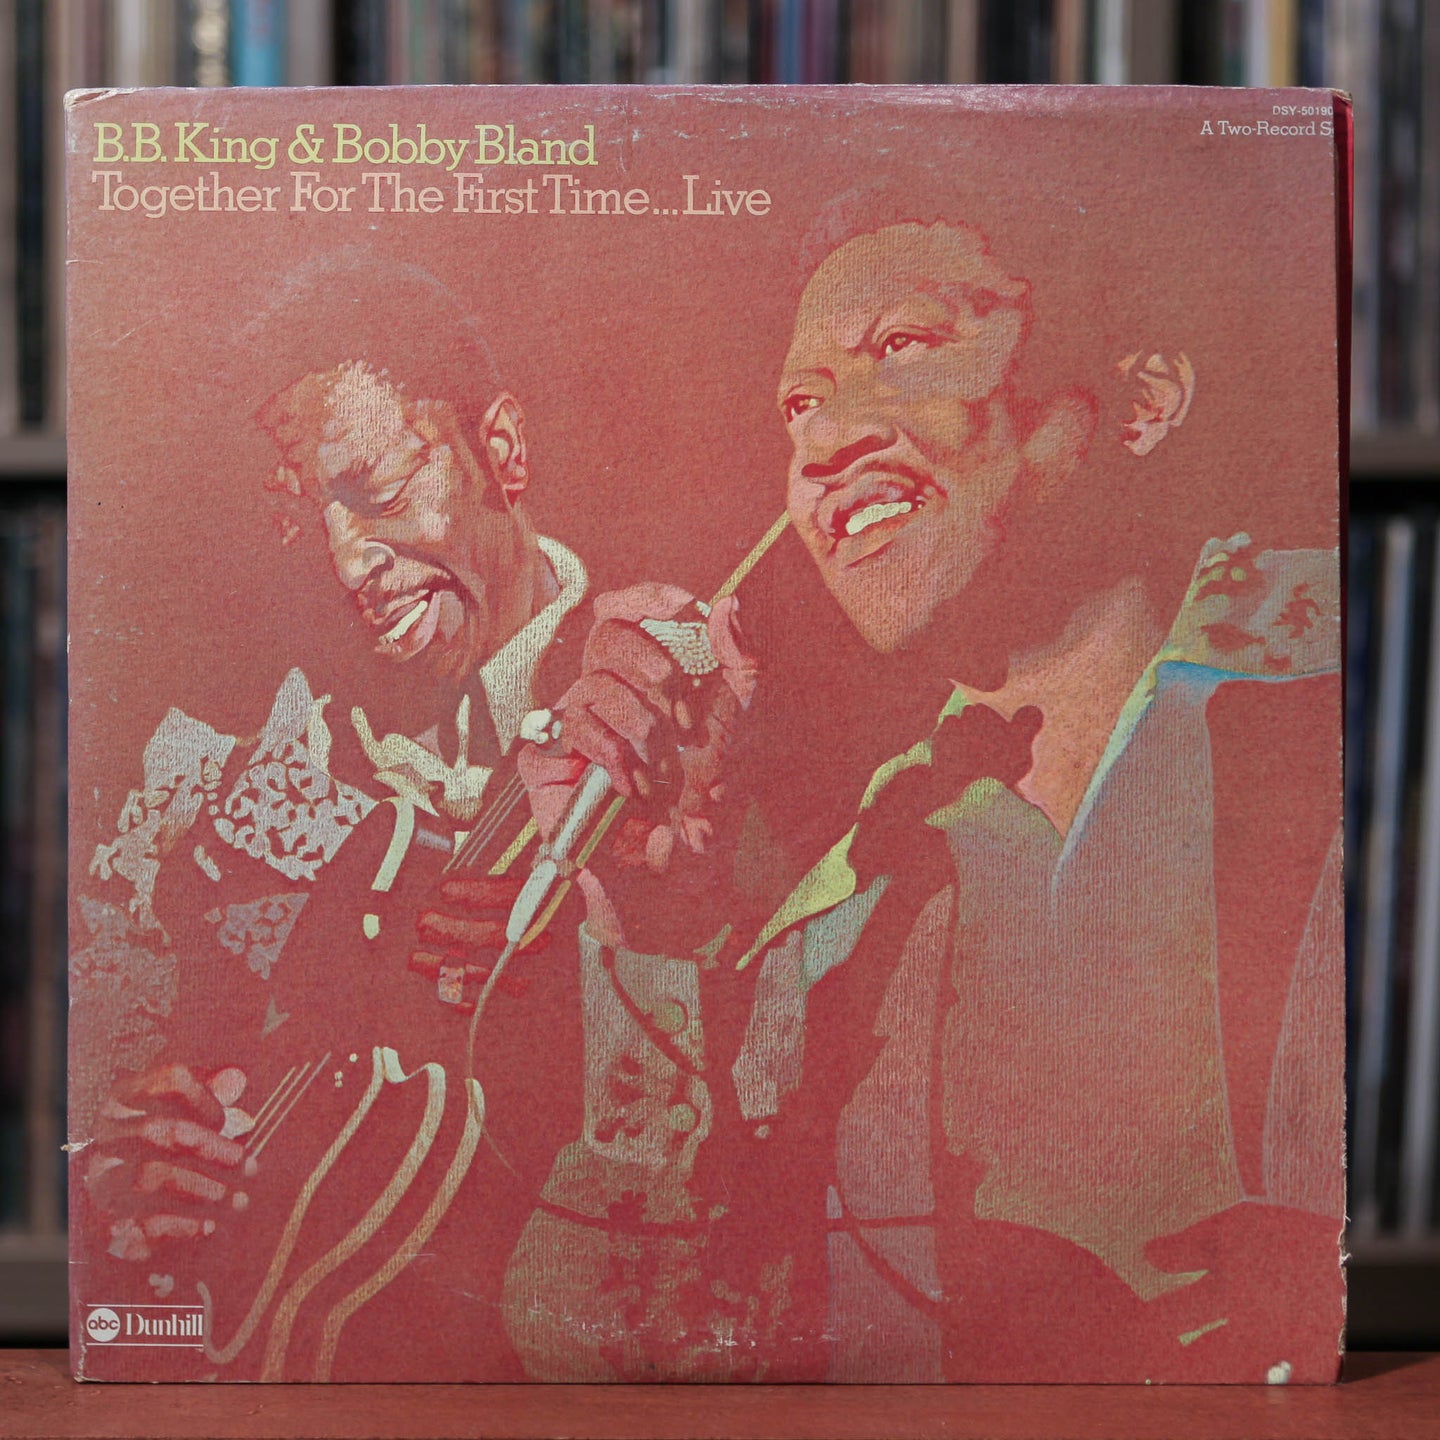 B.B. King & Bobby Bland - Together For The First Time... Live - 2LP - 1974 ABC Dunhill, VG+/EX